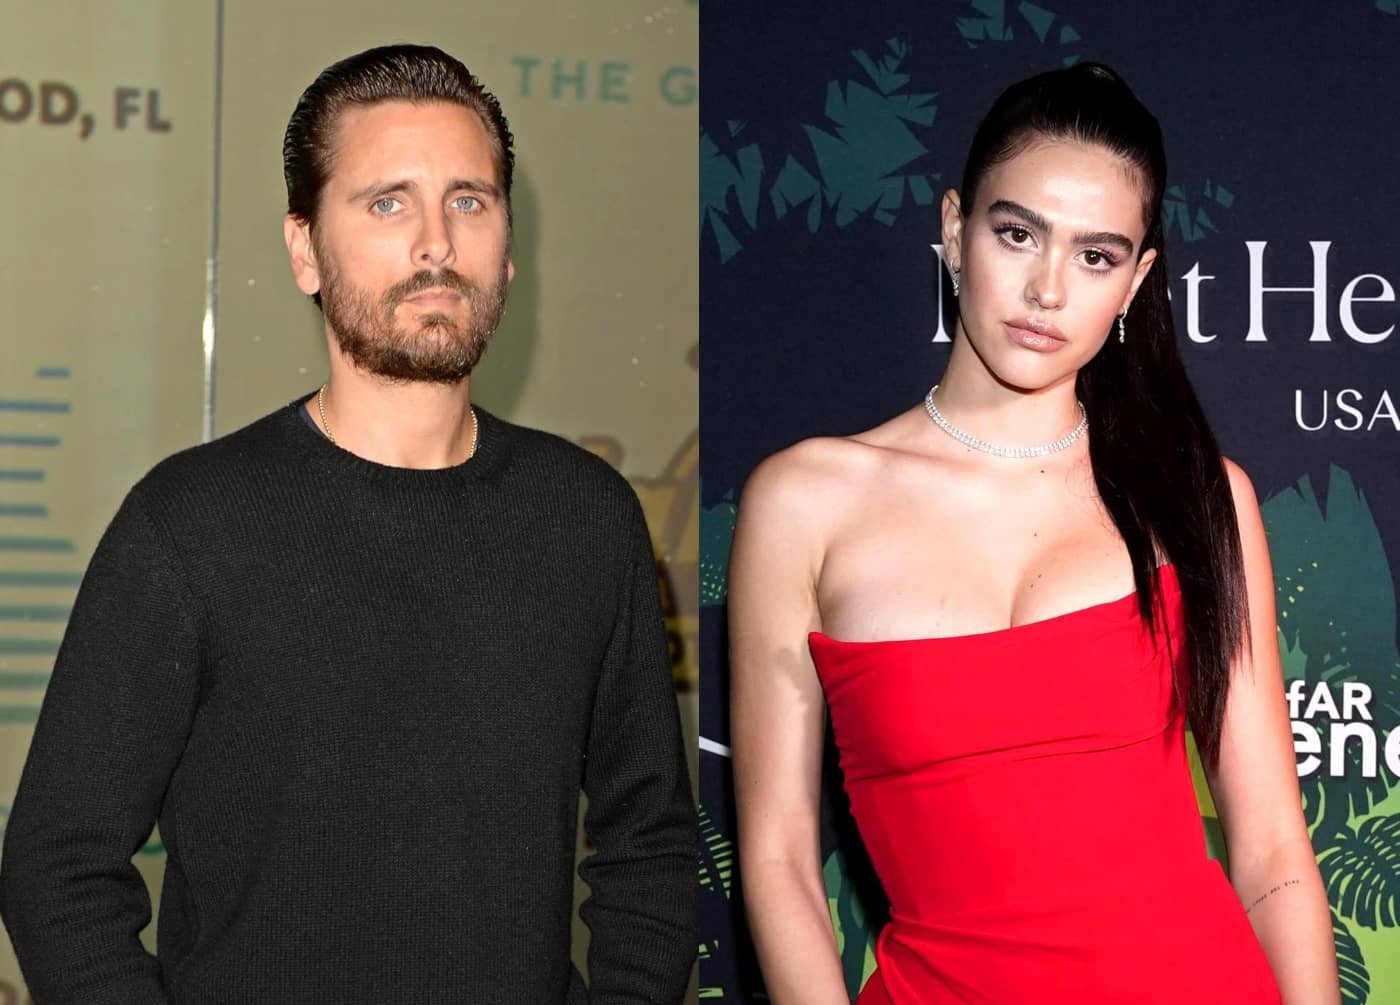 PHOTOS: KUWTK’s Scott Disick Debuts Blonde Hair and Becomes Instagram Official With Amelia Hamlin During Their Miami Getaway, See His Posts!